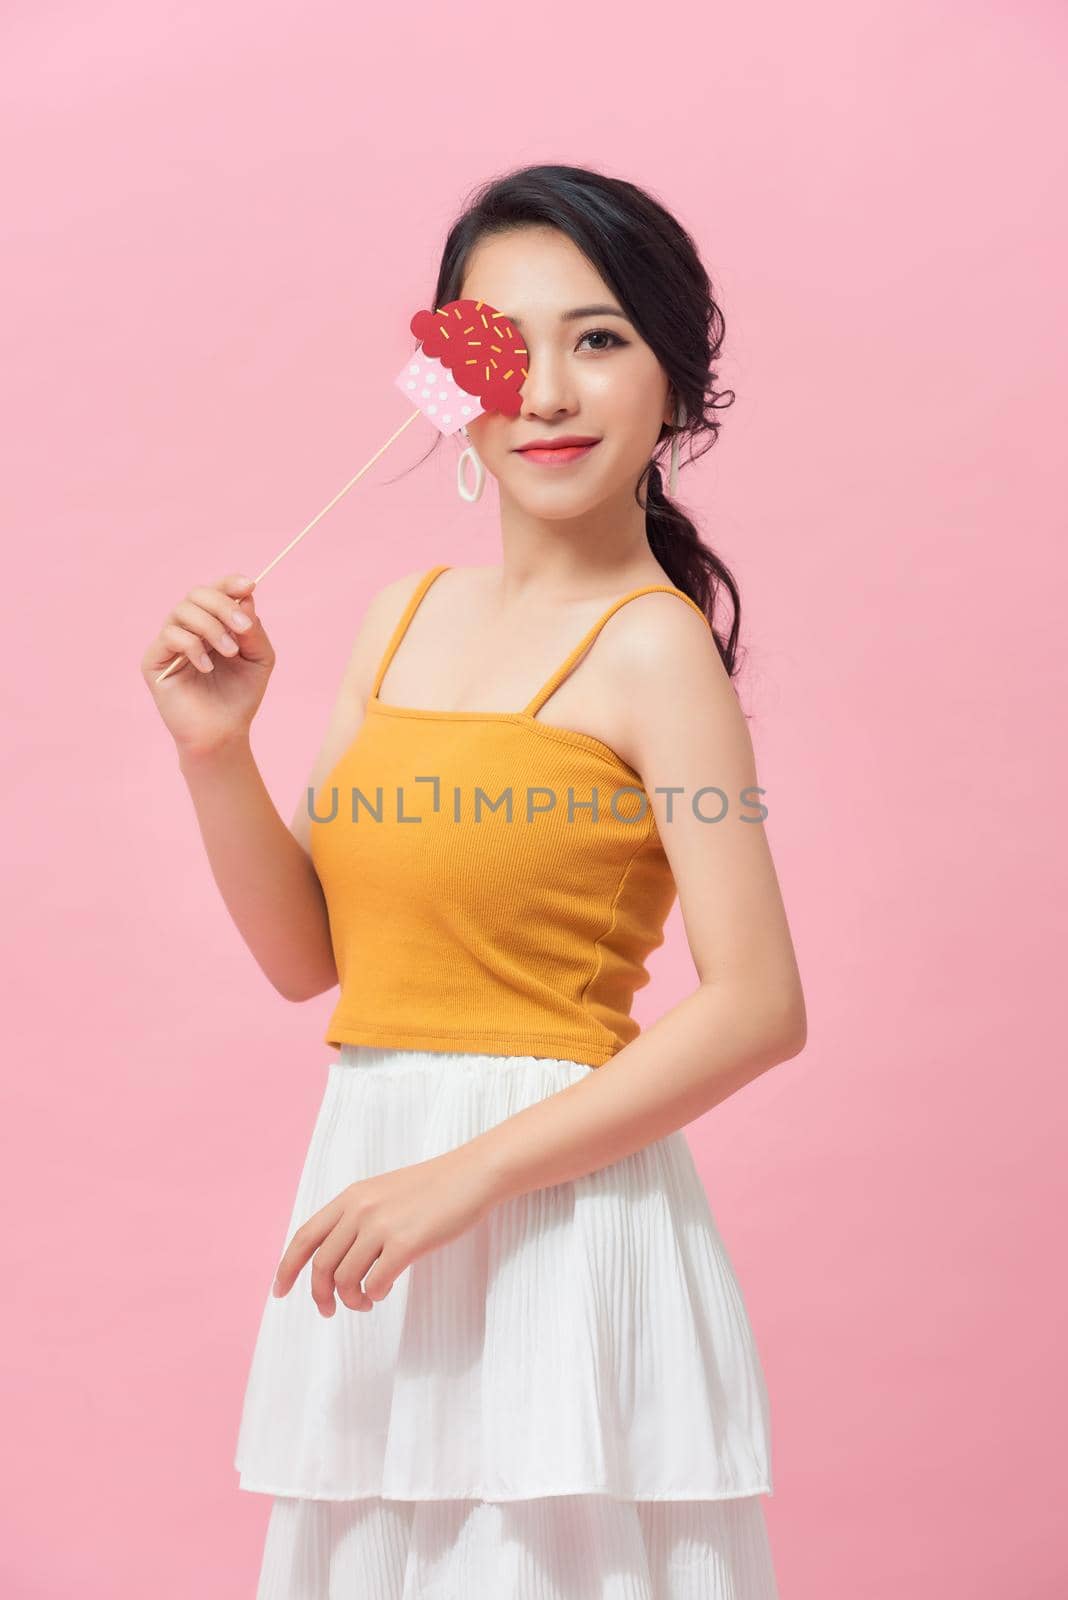 Happy young woman holding paper cupcake on stick over pink background